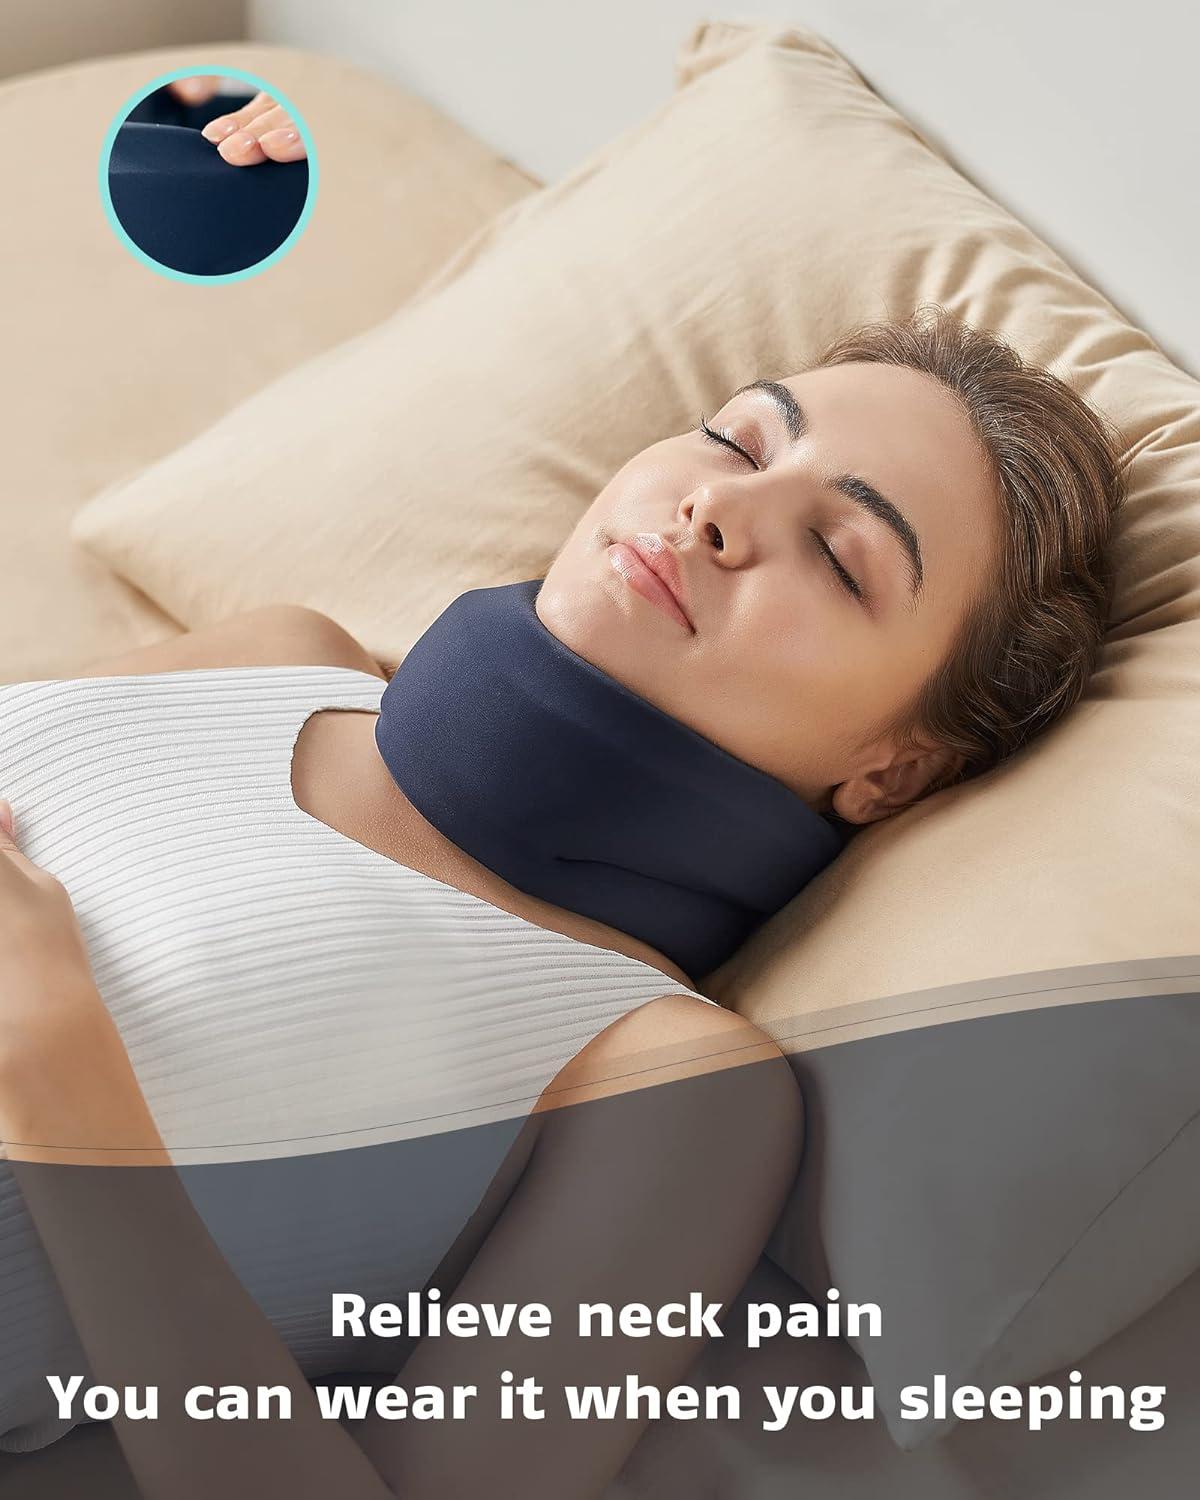  BLABOK Neck Brace For Sleeping - Cervical Collar Relief Neck  Pain And Neck Support Soft Foam Wraps Keep Vertebrae Stable For Relief Of  Cervical Spine Pressure For Women & Men